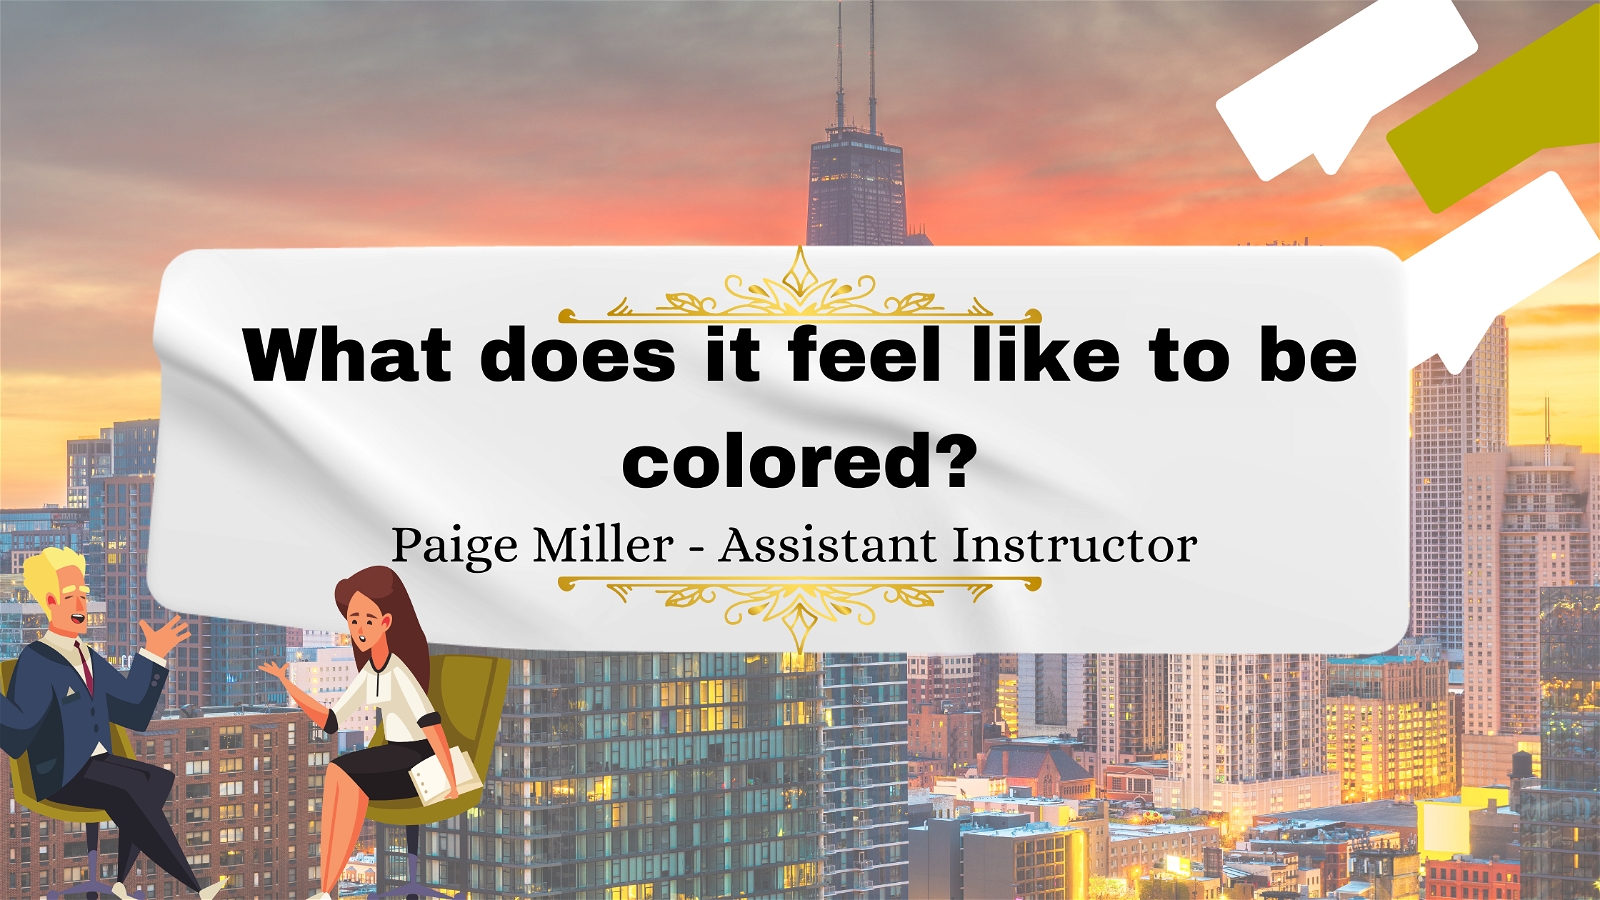 What does it feel like to be colored? - Paige Miller